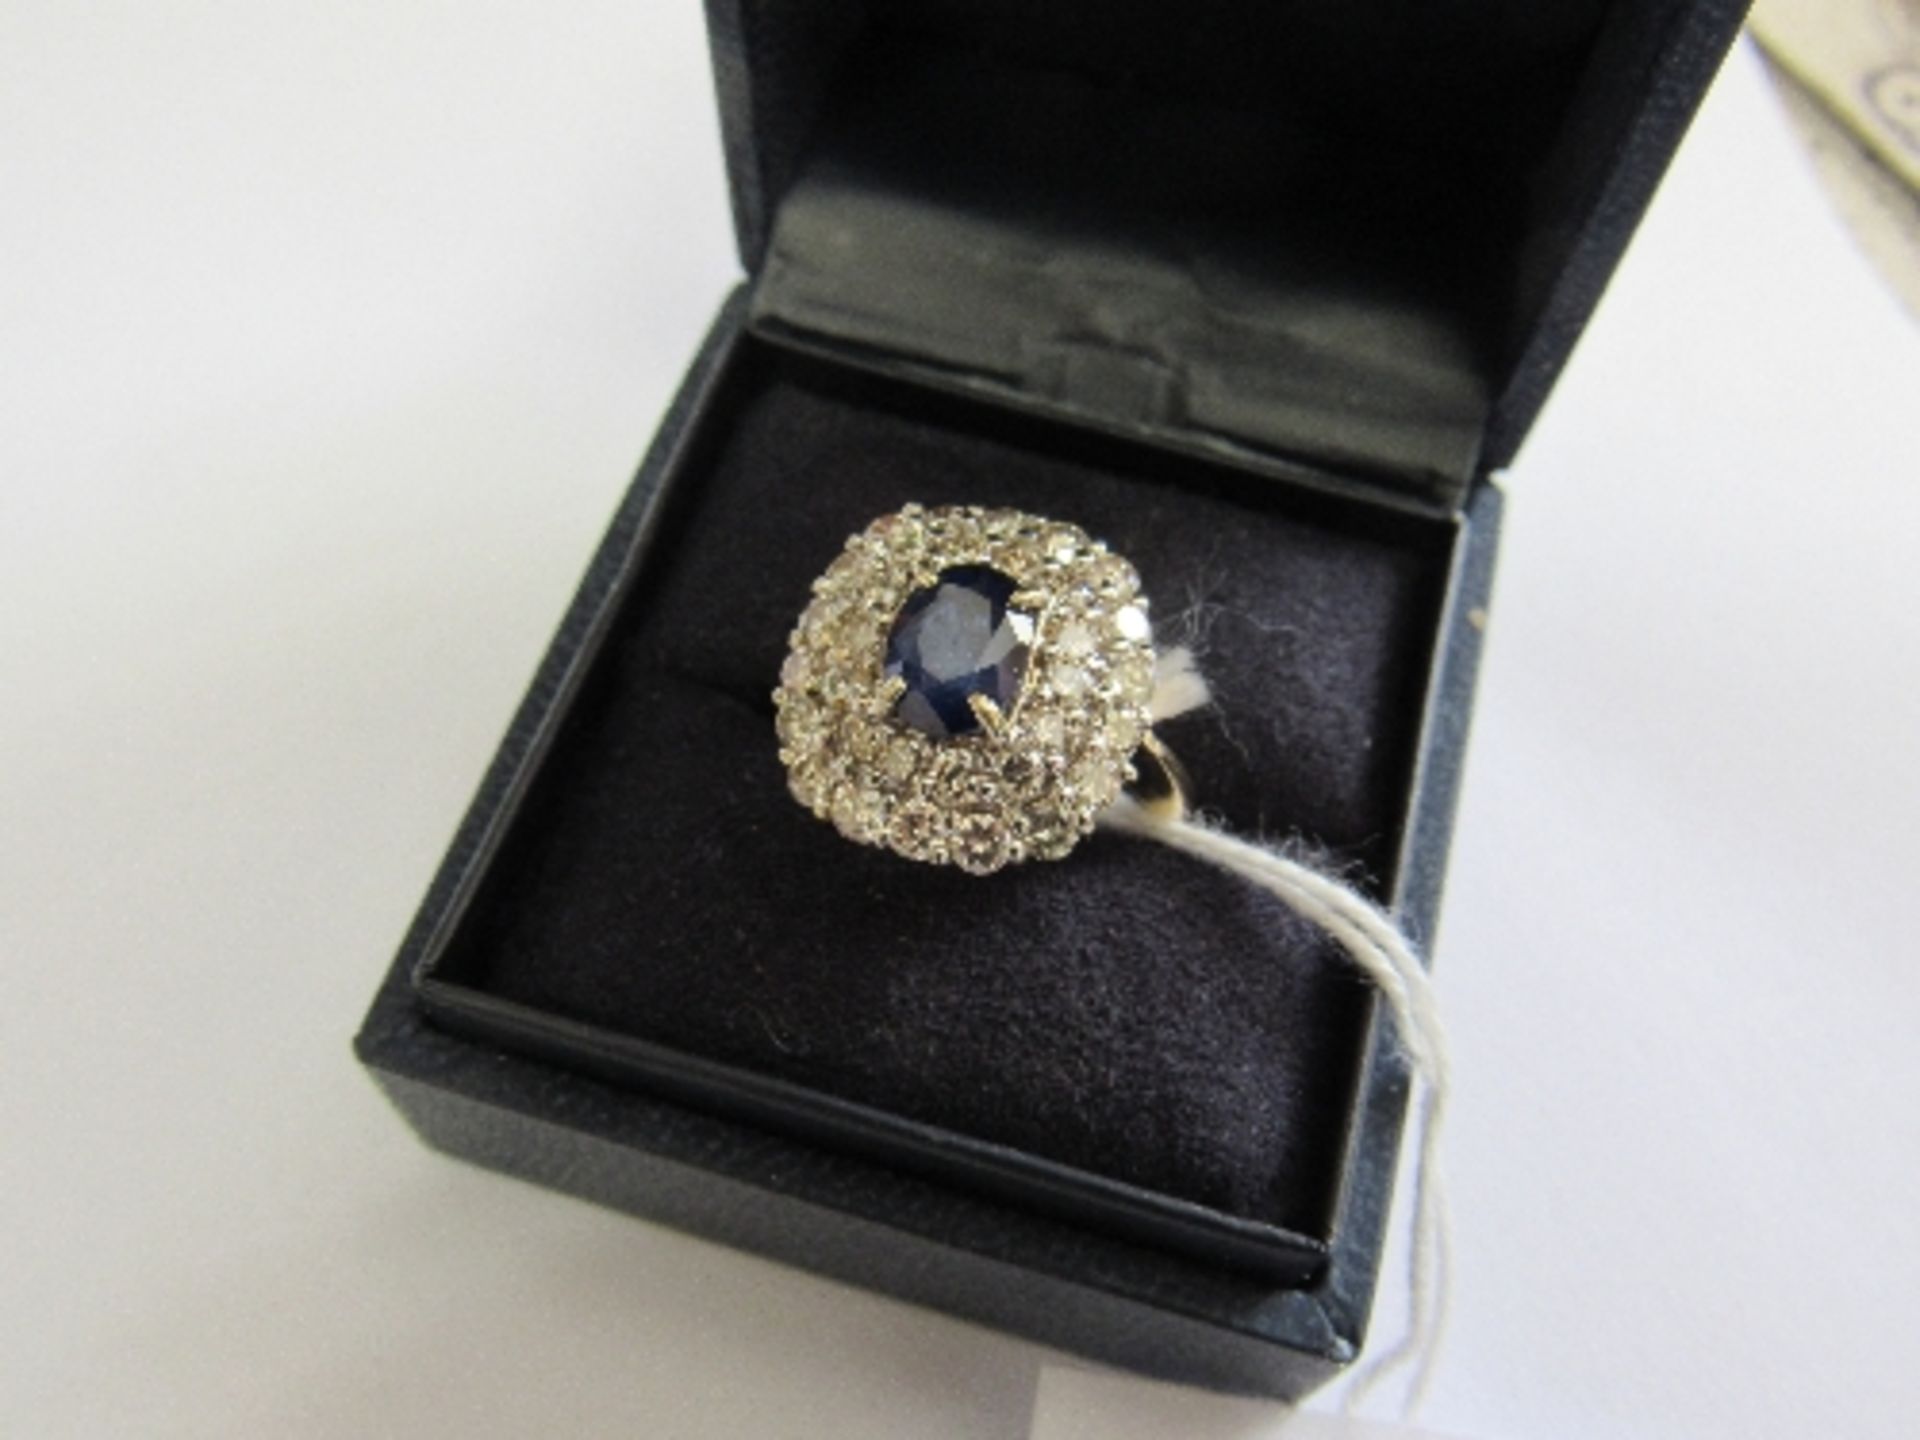 18 carat gold sapphire & diamond cluster ring, set with approx 1.5 carats of 8 cut diamonds. Price